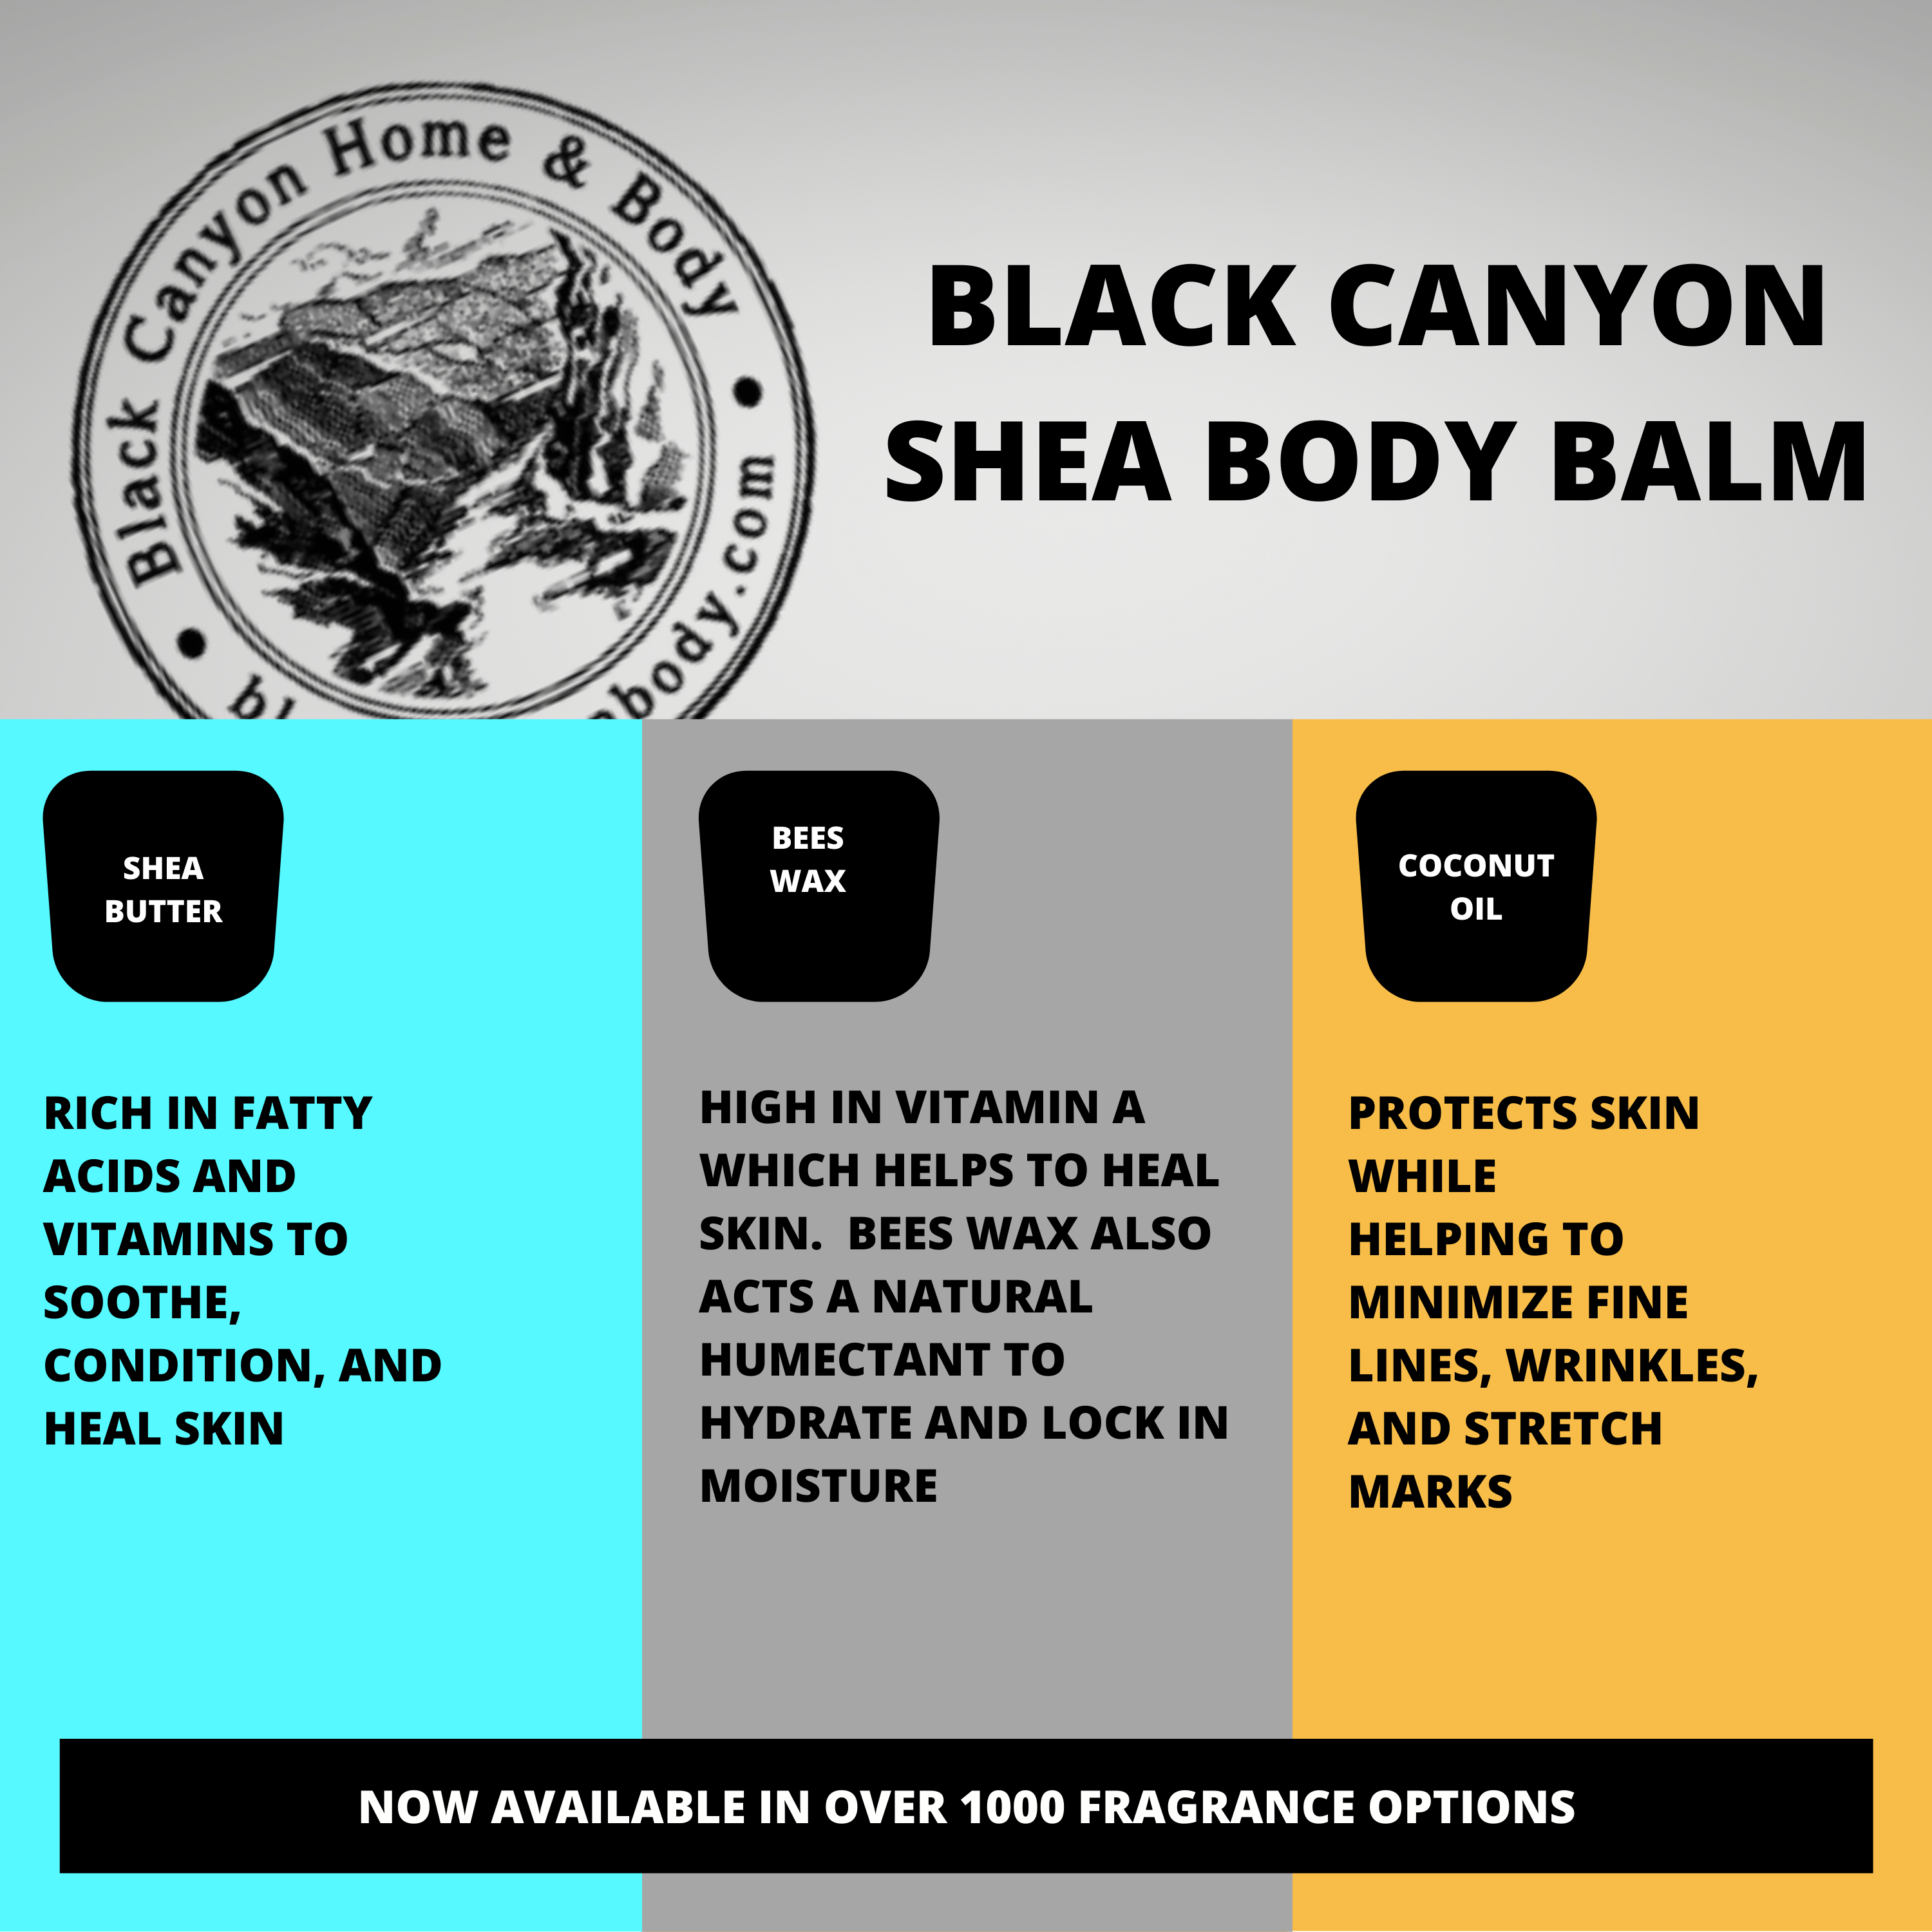 Black Canyon Wild Cherry Vanilla Scented Natural Body Balm with Shea